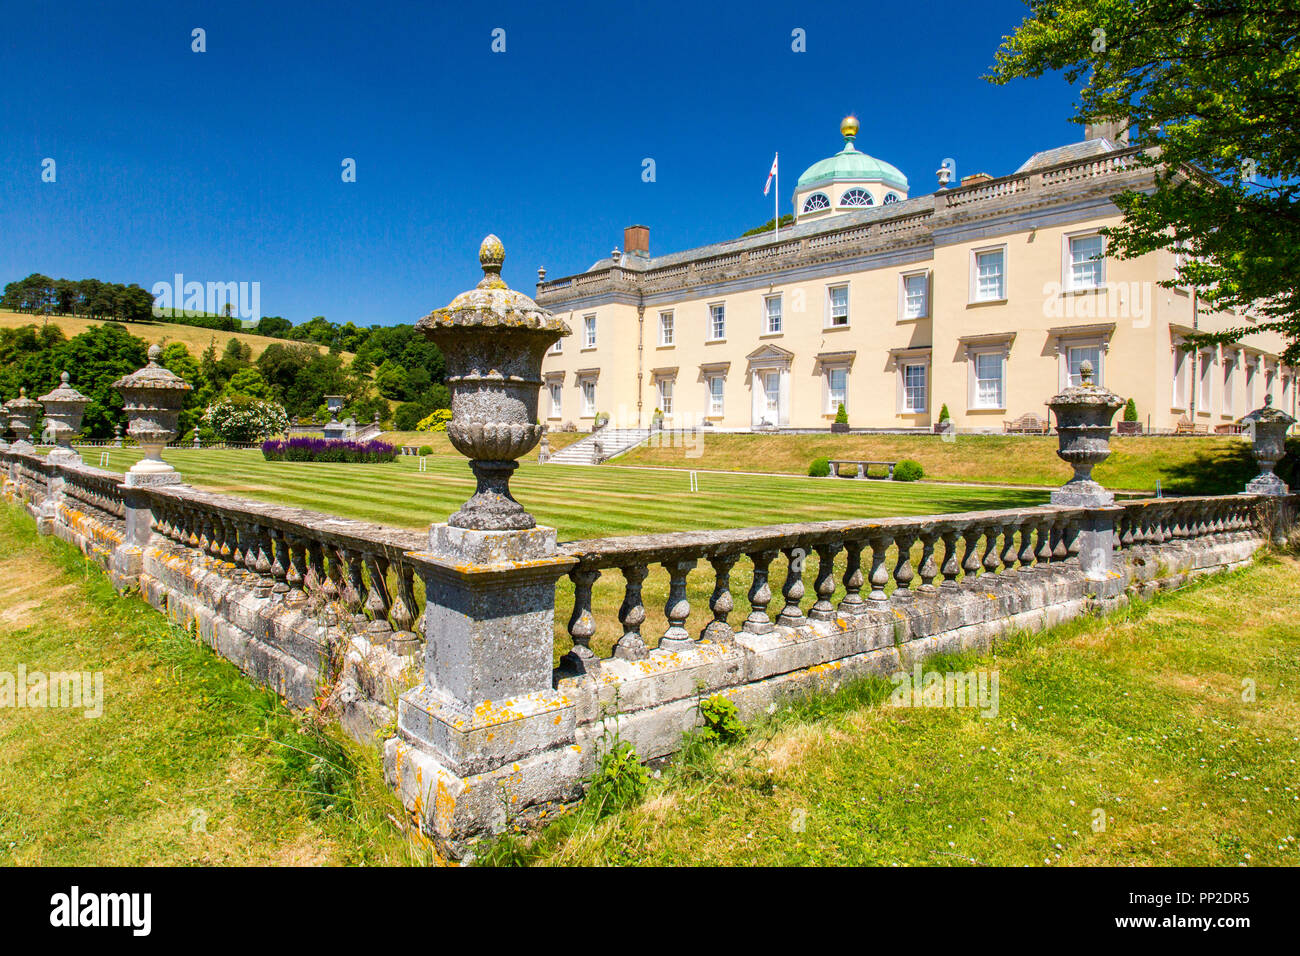 Impressive Palladian architecture at Castle Hill House and Gardens, near Filleigh, Devon, England, UK Stock Photo